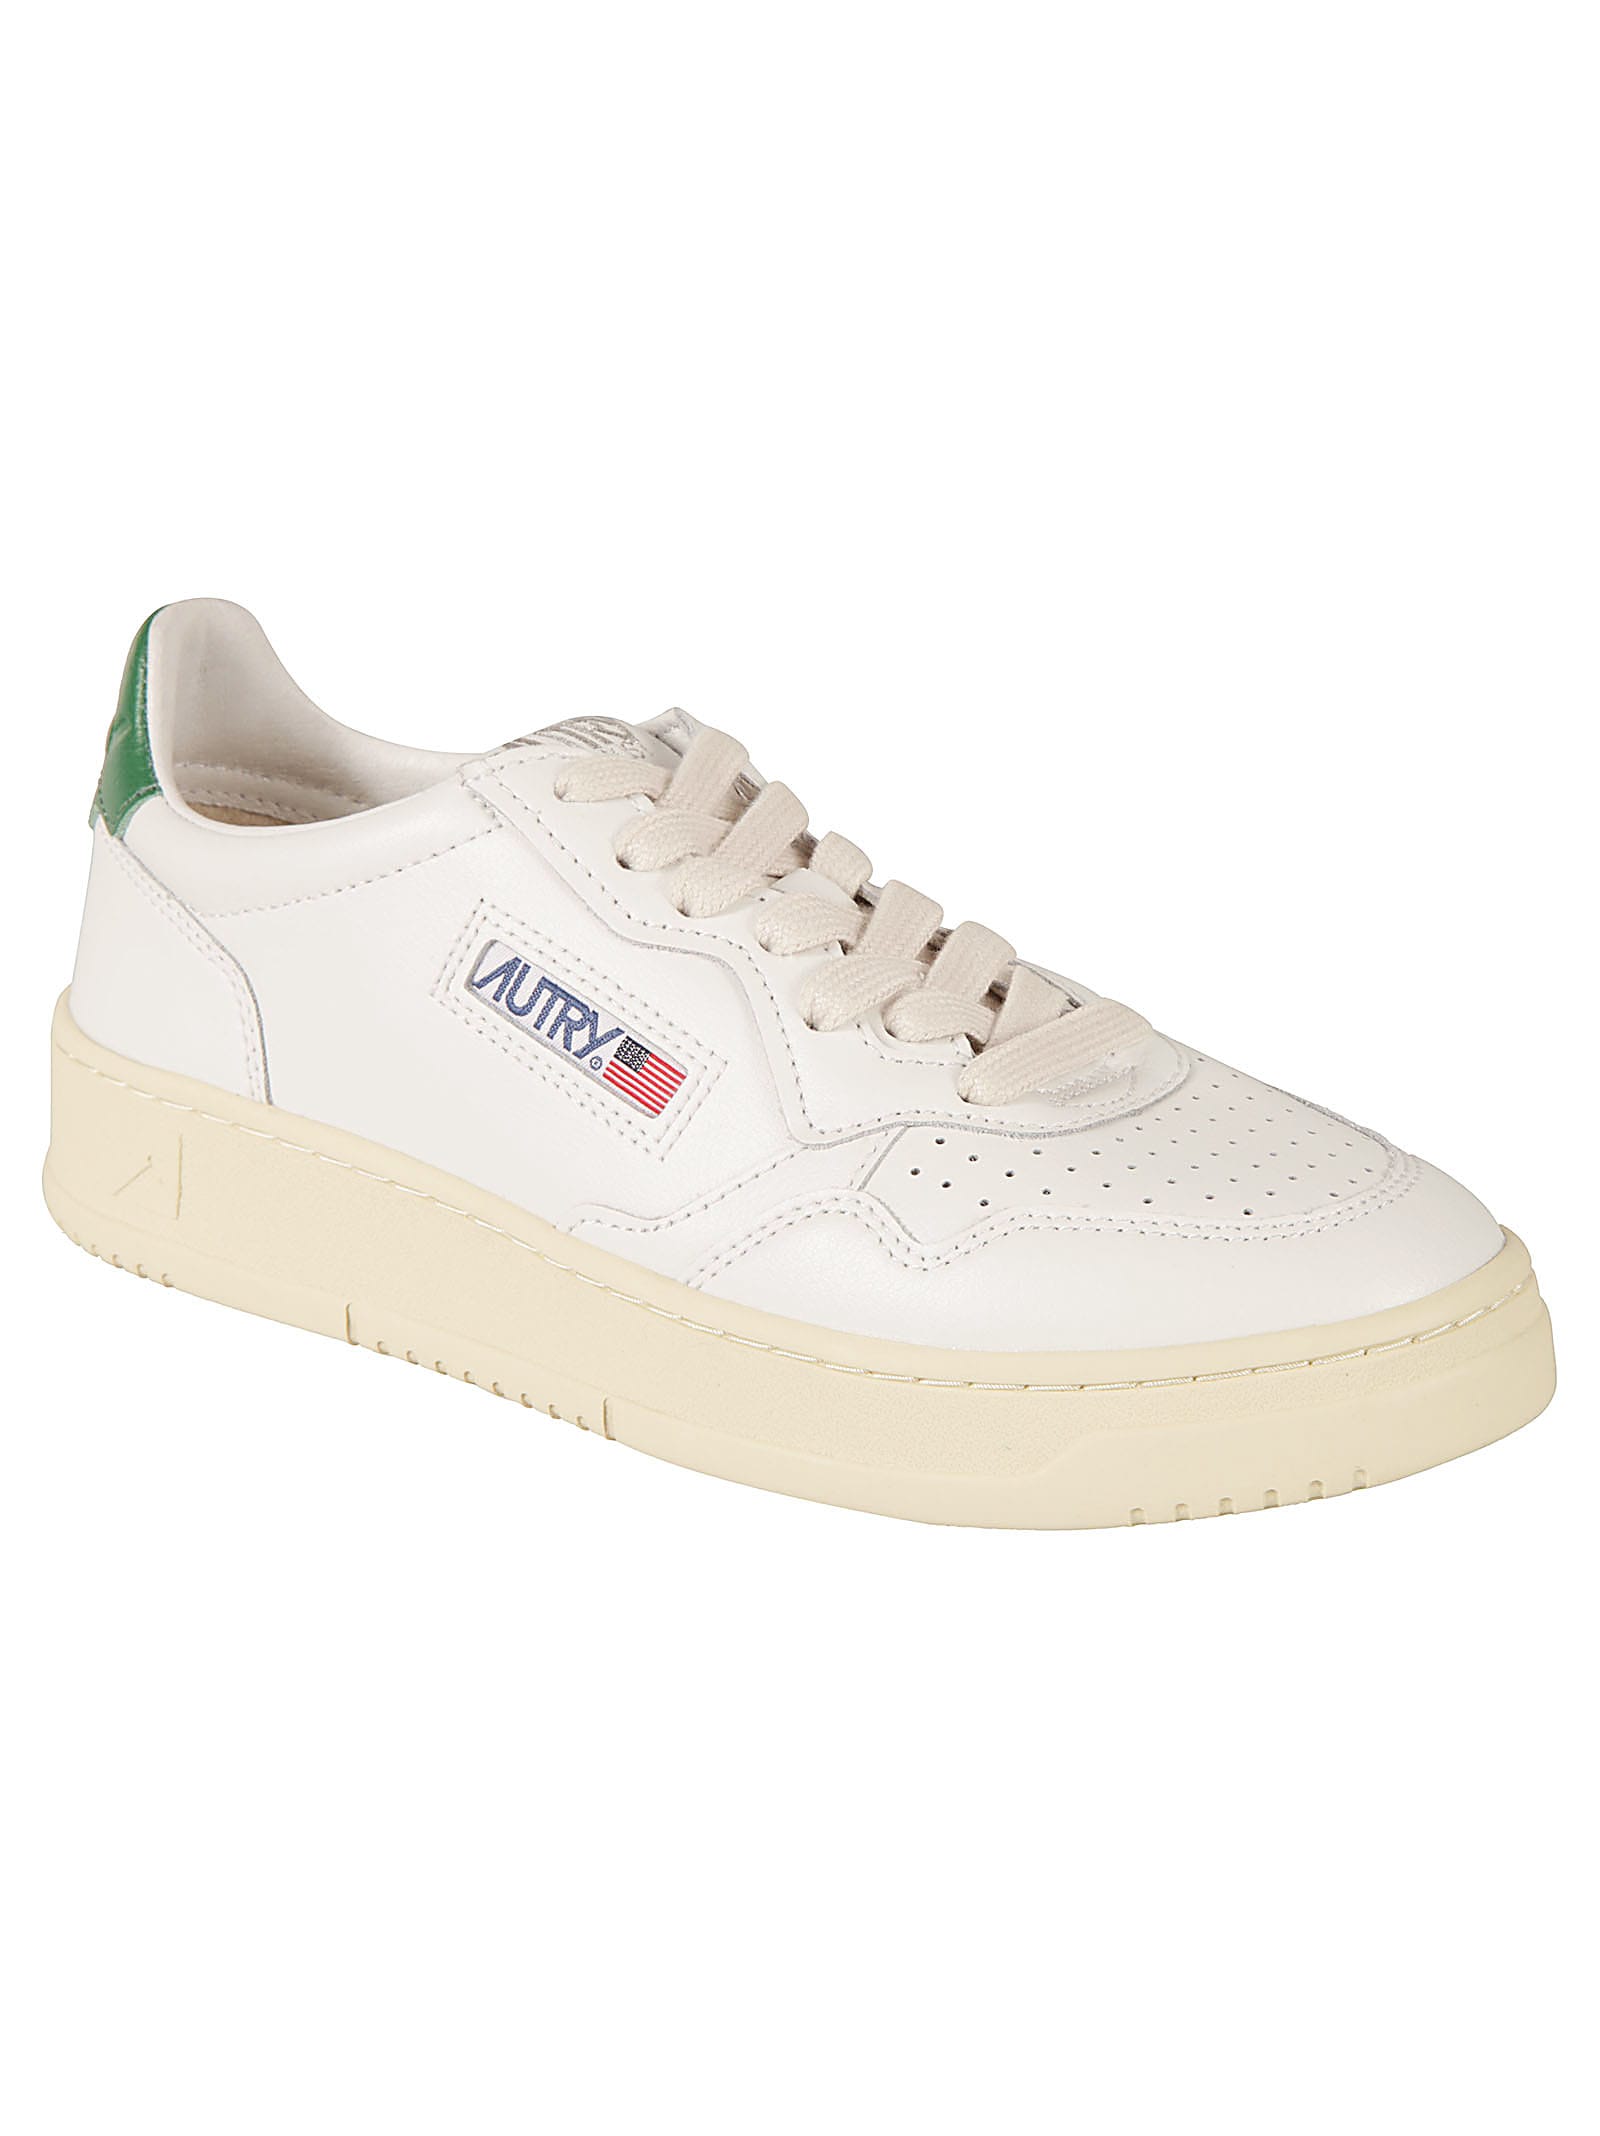 Shop Autry Medalist Low Sneakers In White/green